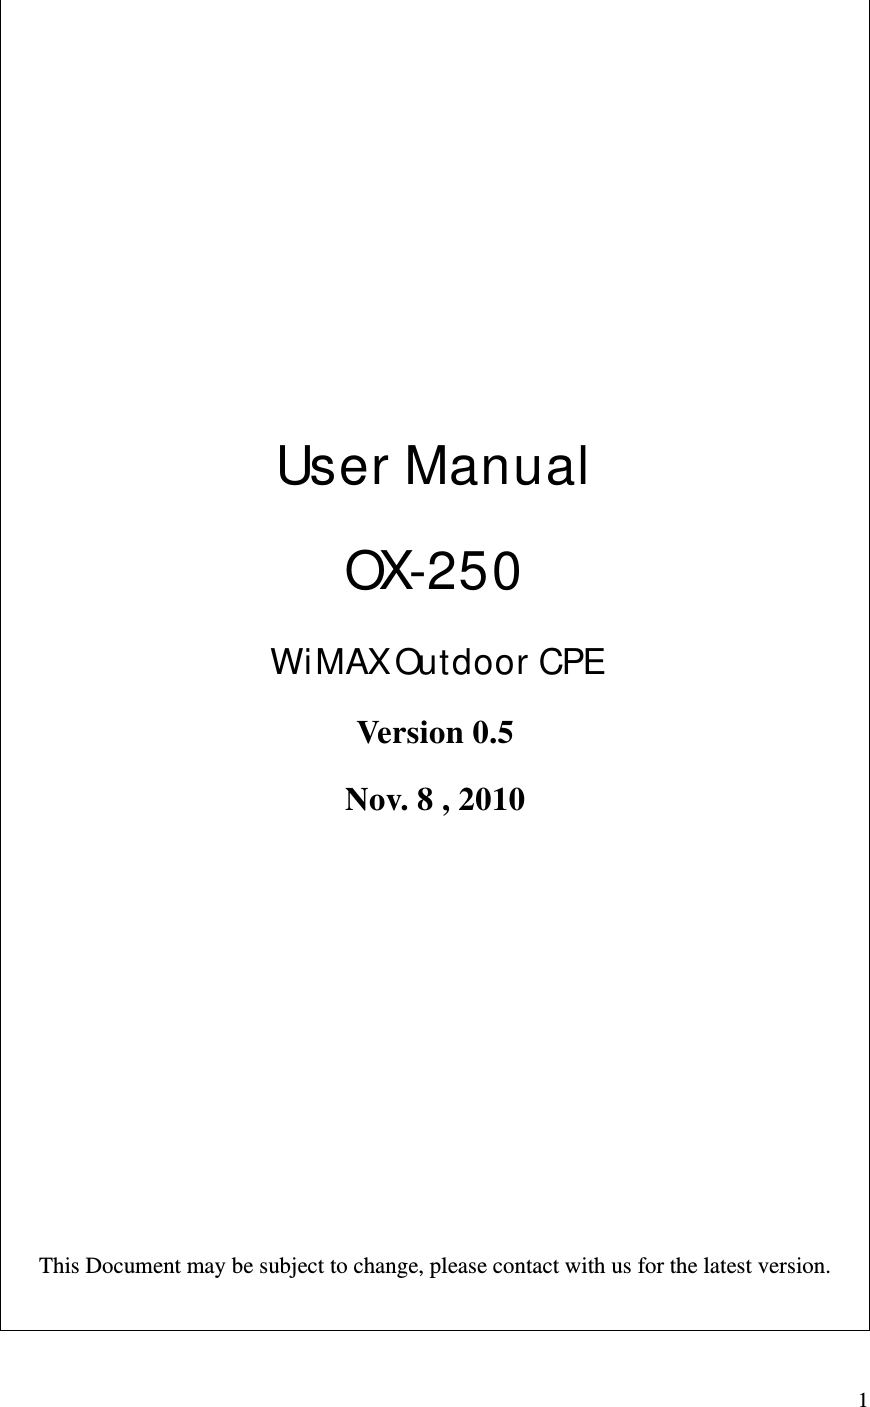  1     User Manual OX-250 WiMAX Outdoor CPE Version 0.5 Nov. 8 , 2010      This Document may be subject to change, please contact with us for the latest version.  